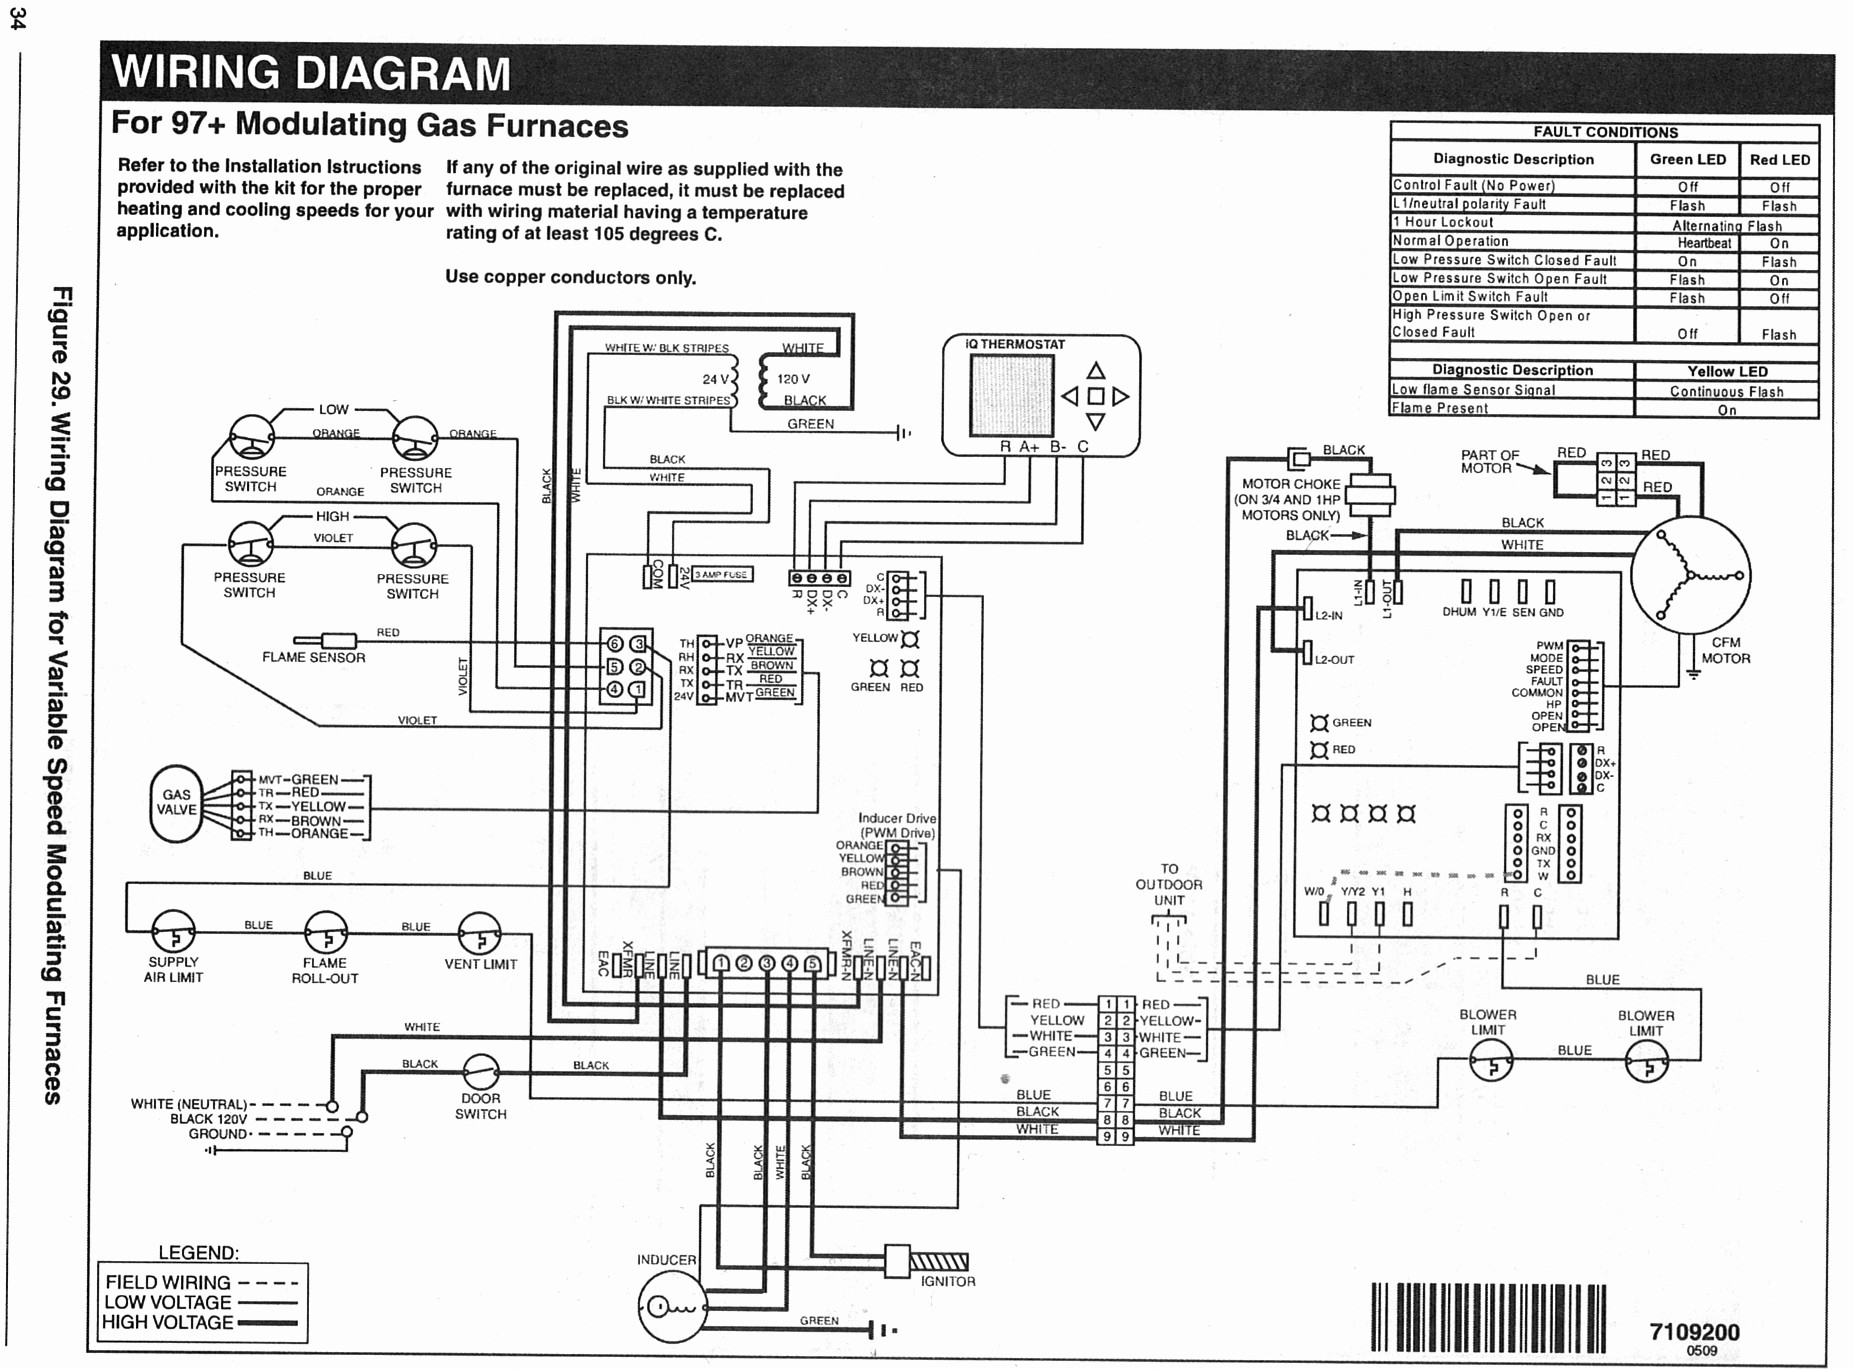 White Rodgers thermostat Wiring Diagram Wiring Diagram White Rodgers thermostat Wiring Diagram Unique Old Of White Rodgers thermostat Wiring Diagram